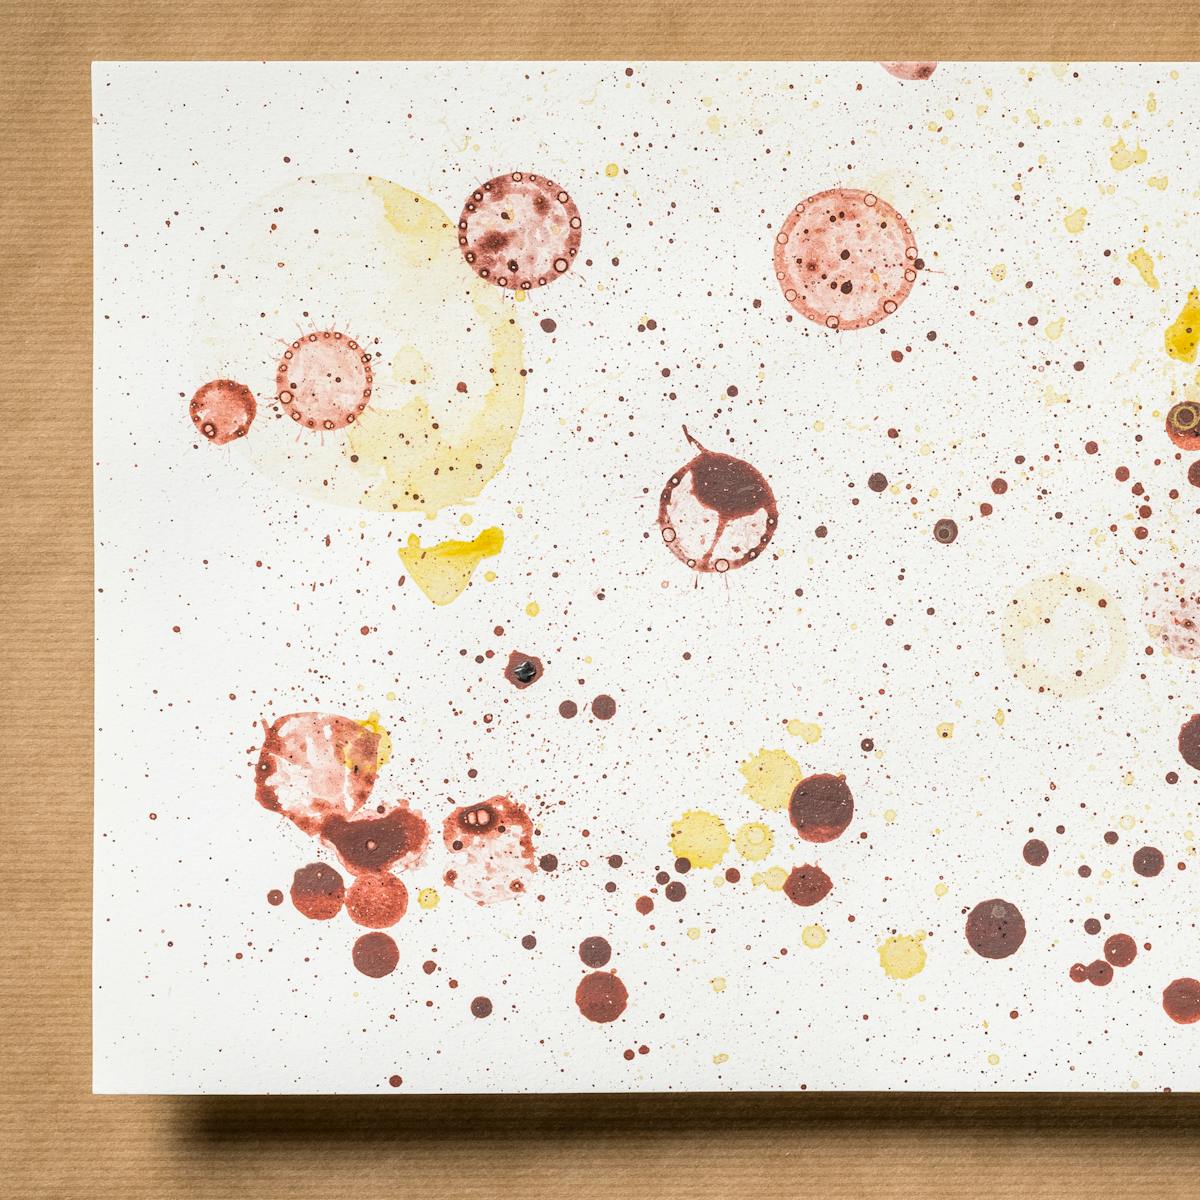 Photograph of an original artwork on watercolour paper. The artwork is resting on a brown parcel paper background. The artwork shows many varying in size droplet spatters and rings, made with coloured ink. The ink colours are dark red, yellow  and light red. The spatters seem random in distribution.